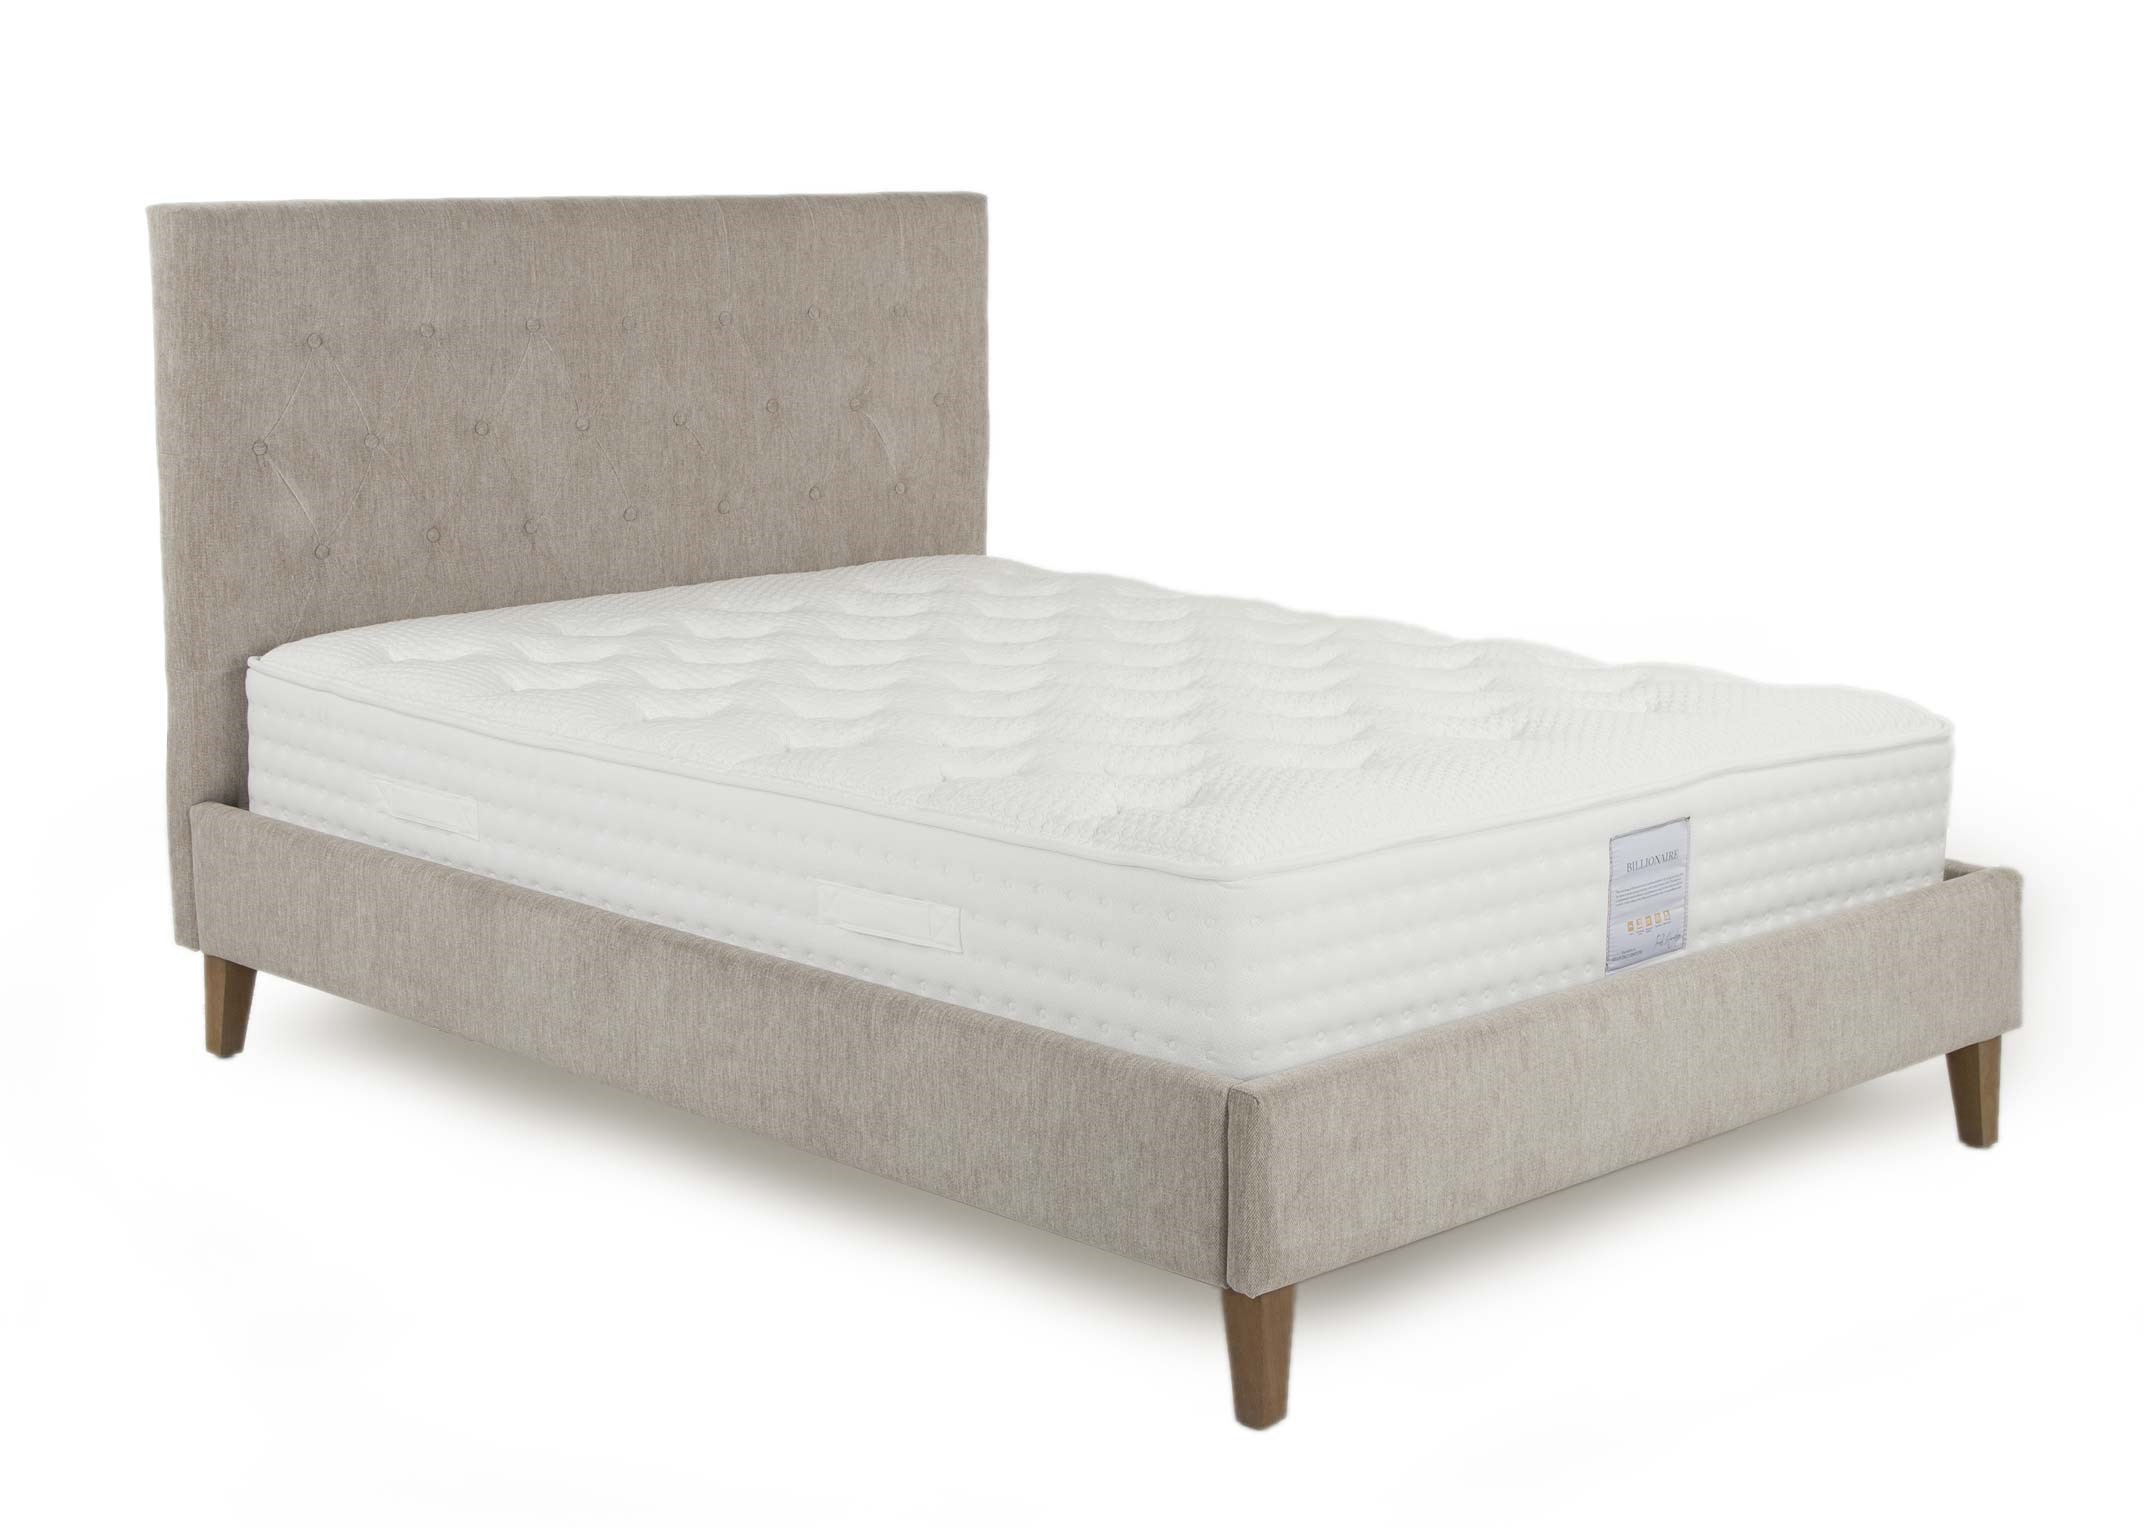 Beige Fabric Bed Frame Calia, Faux Suede King Size Bed Frame